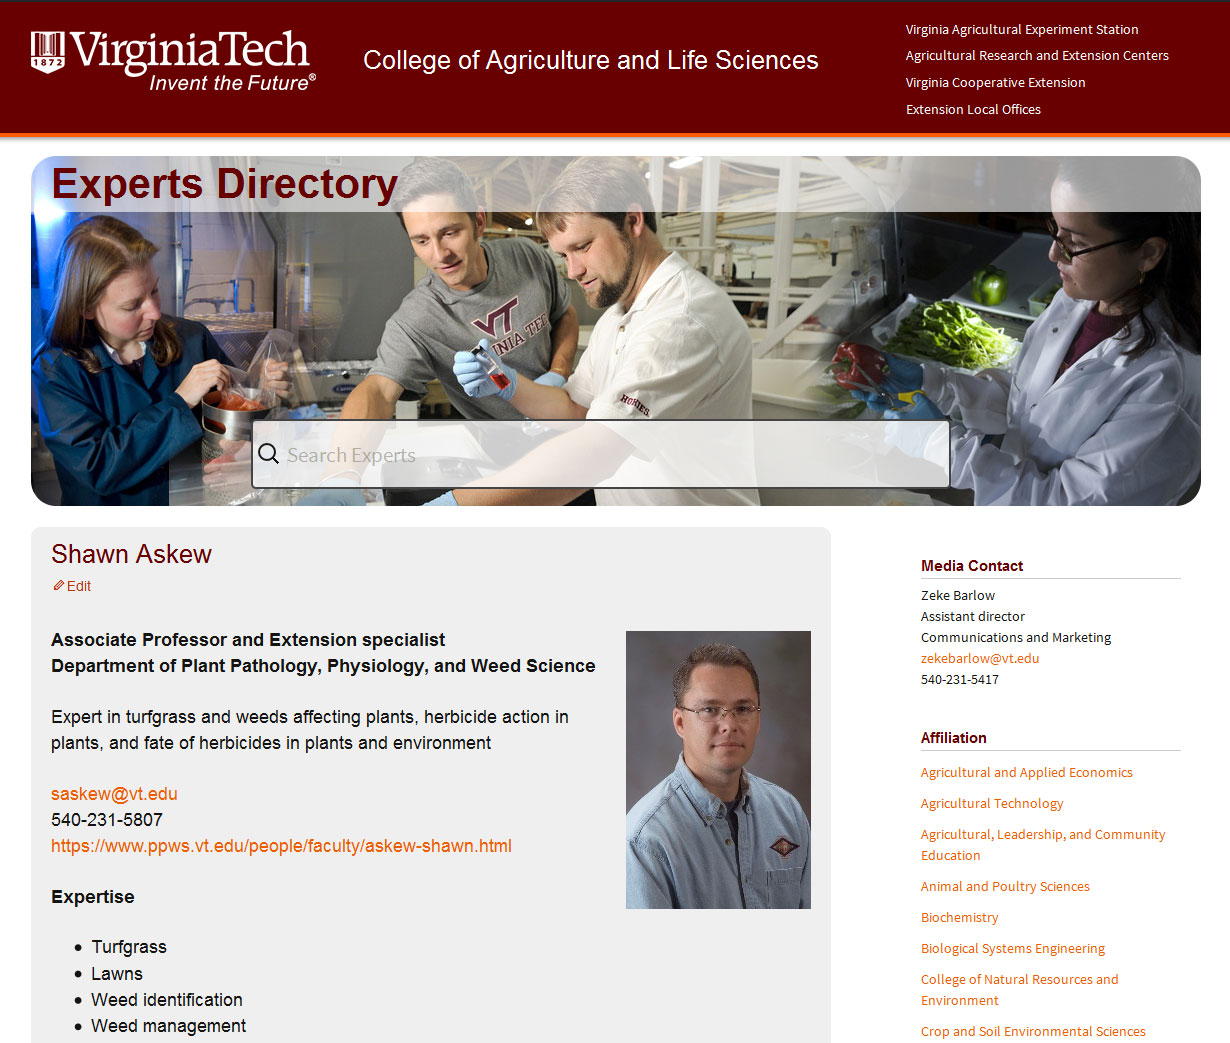 Experts Directory (2015 - Current [2017])